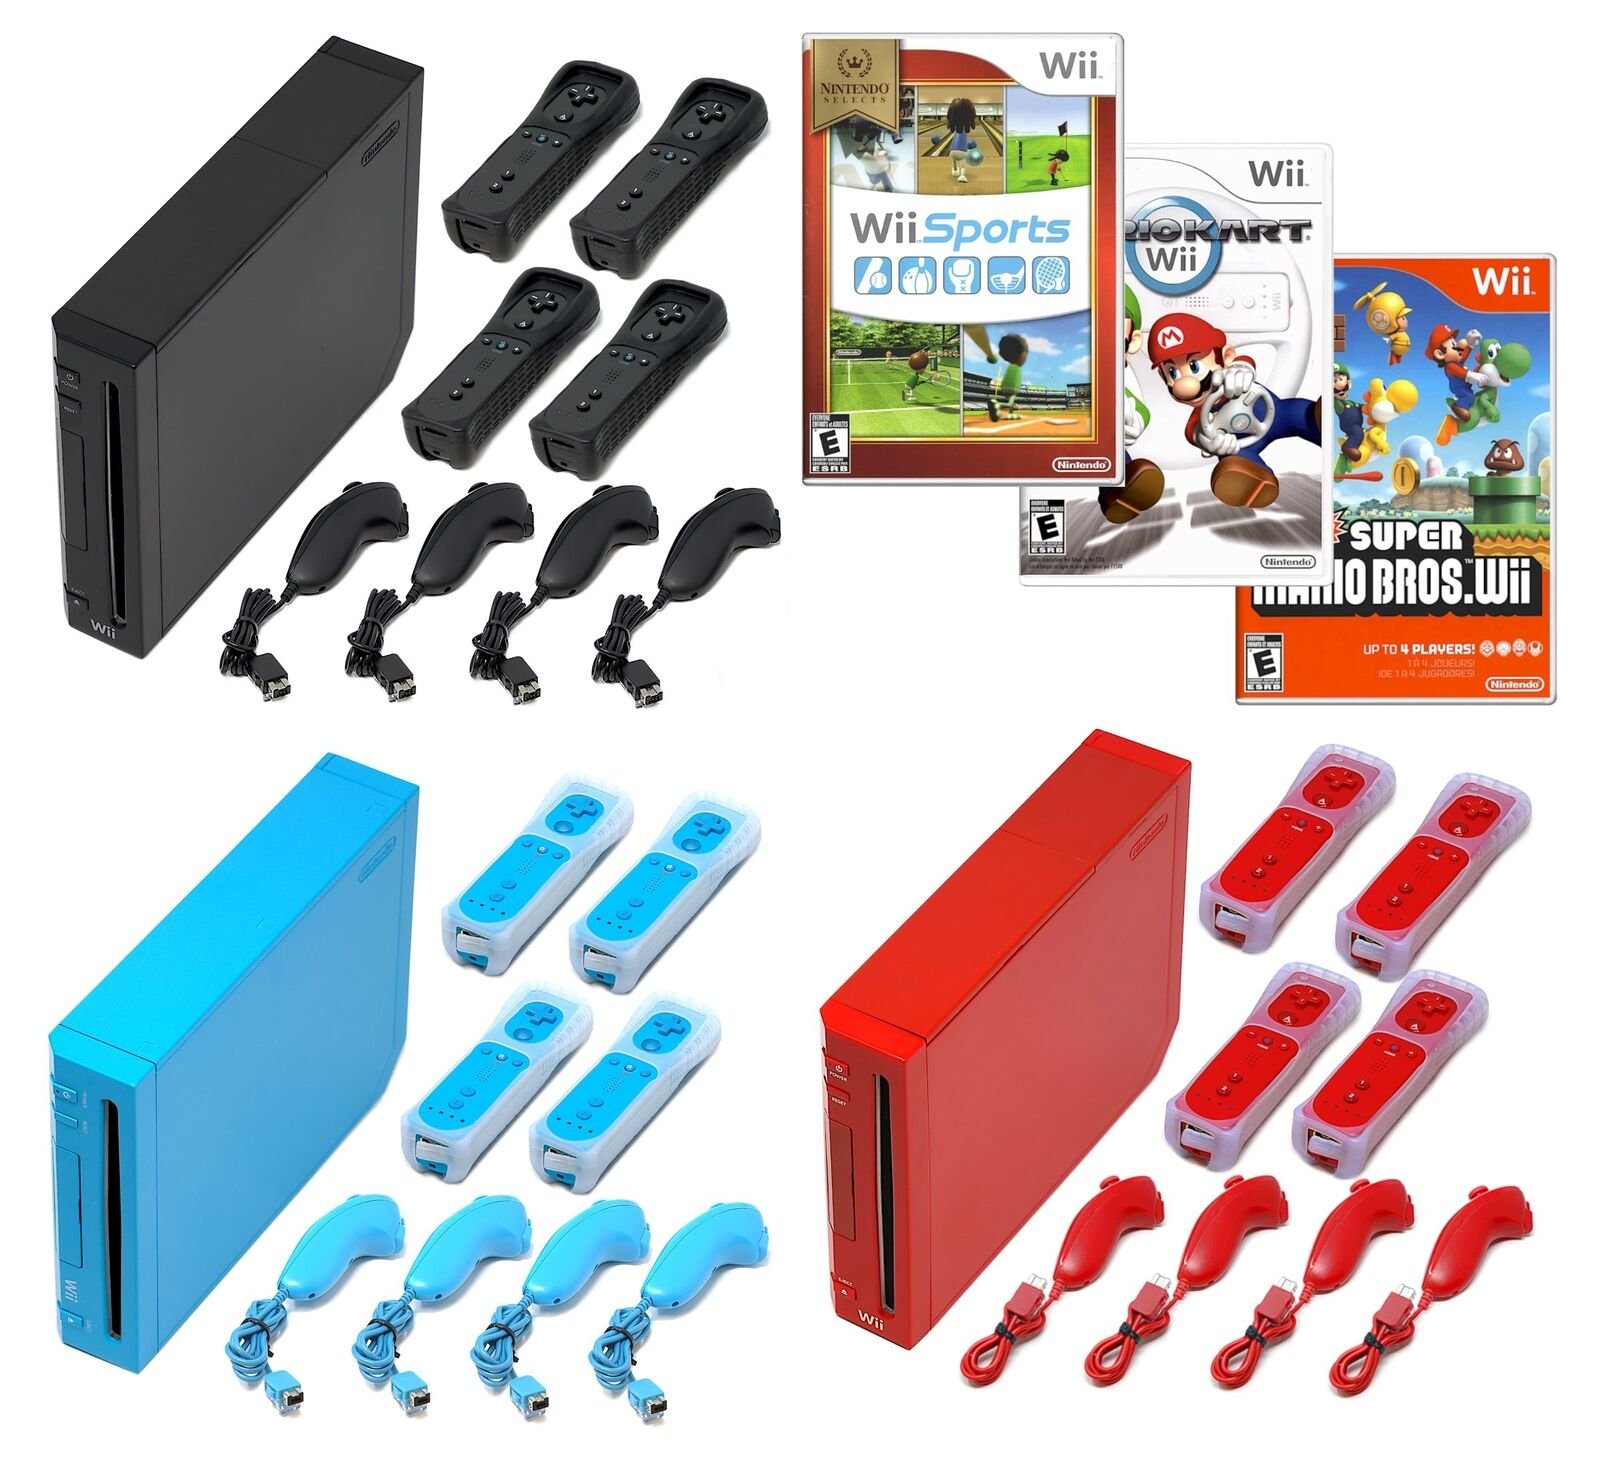 Nintendo Wii Game Console + Your Choice Black, Red or Blue + 1-4 Remotes + Wii Sports, Mario Kart or New Super Mario Bros!